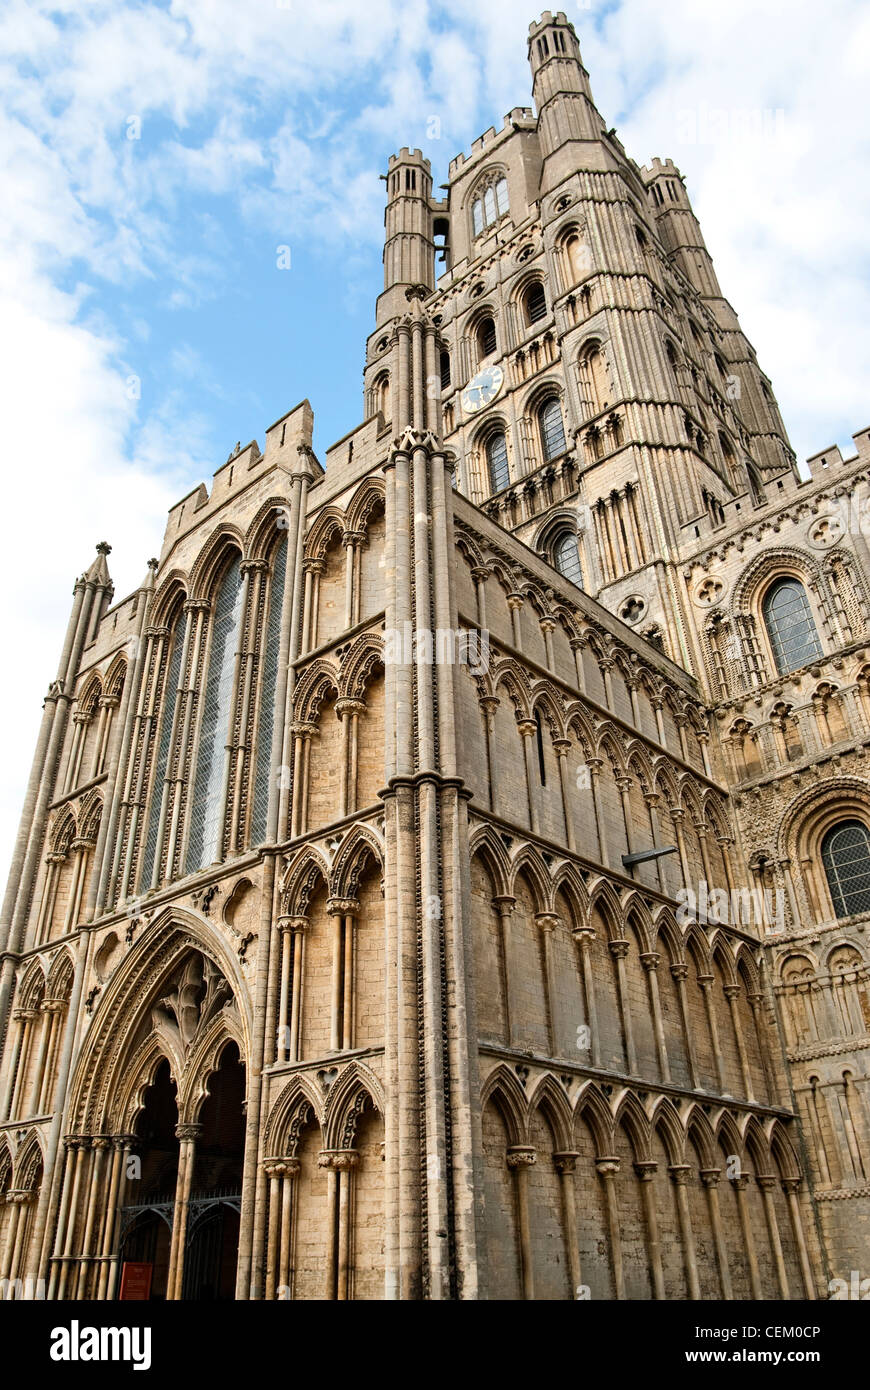 Cathedral Church of the Holy and Undivided Trinity in Ely, known as the 'Ship of the Fens'. Stock Photo